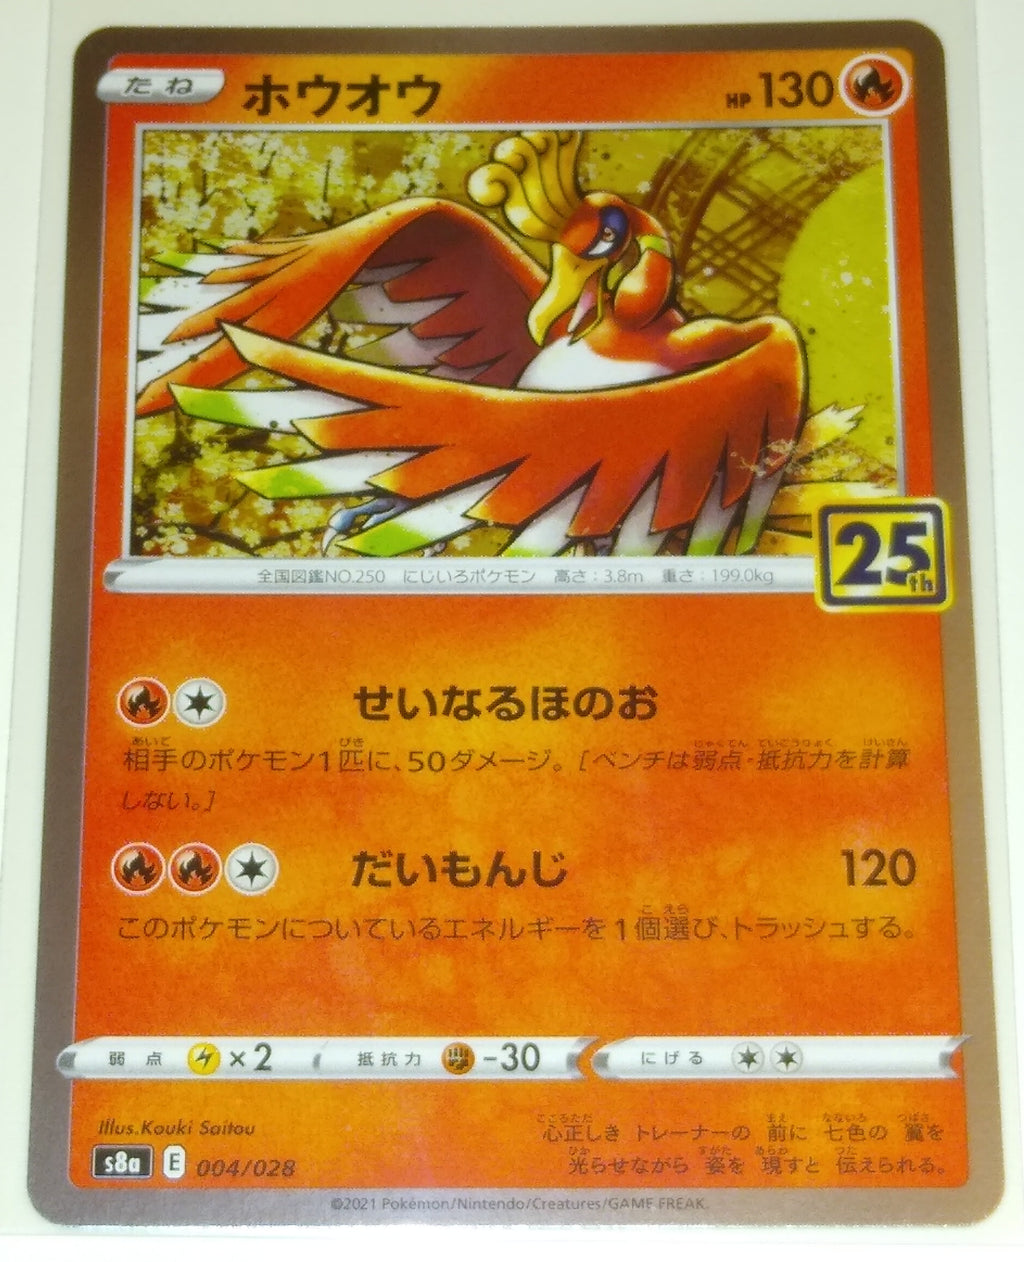 s8a 25th Anniversary Collection 004/028 Ho-oh Holo